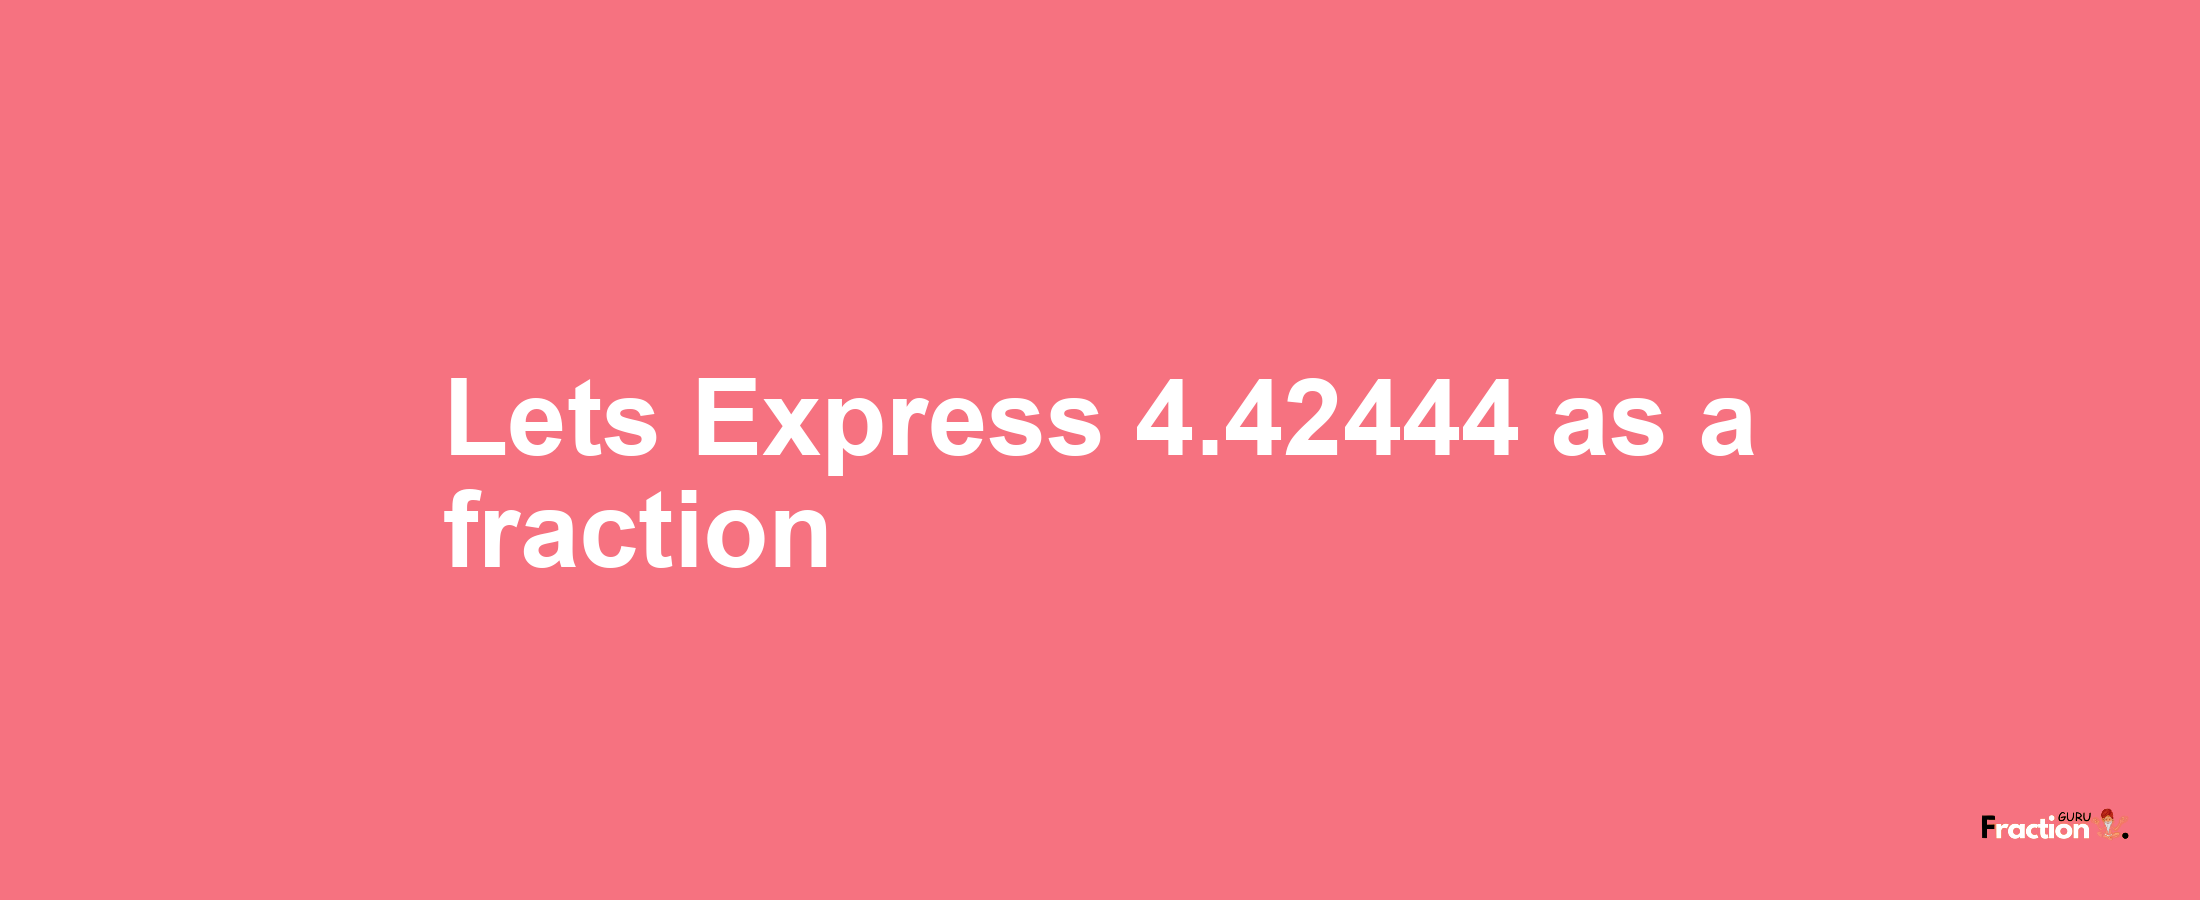 Lets Express 4.42444 as afraction